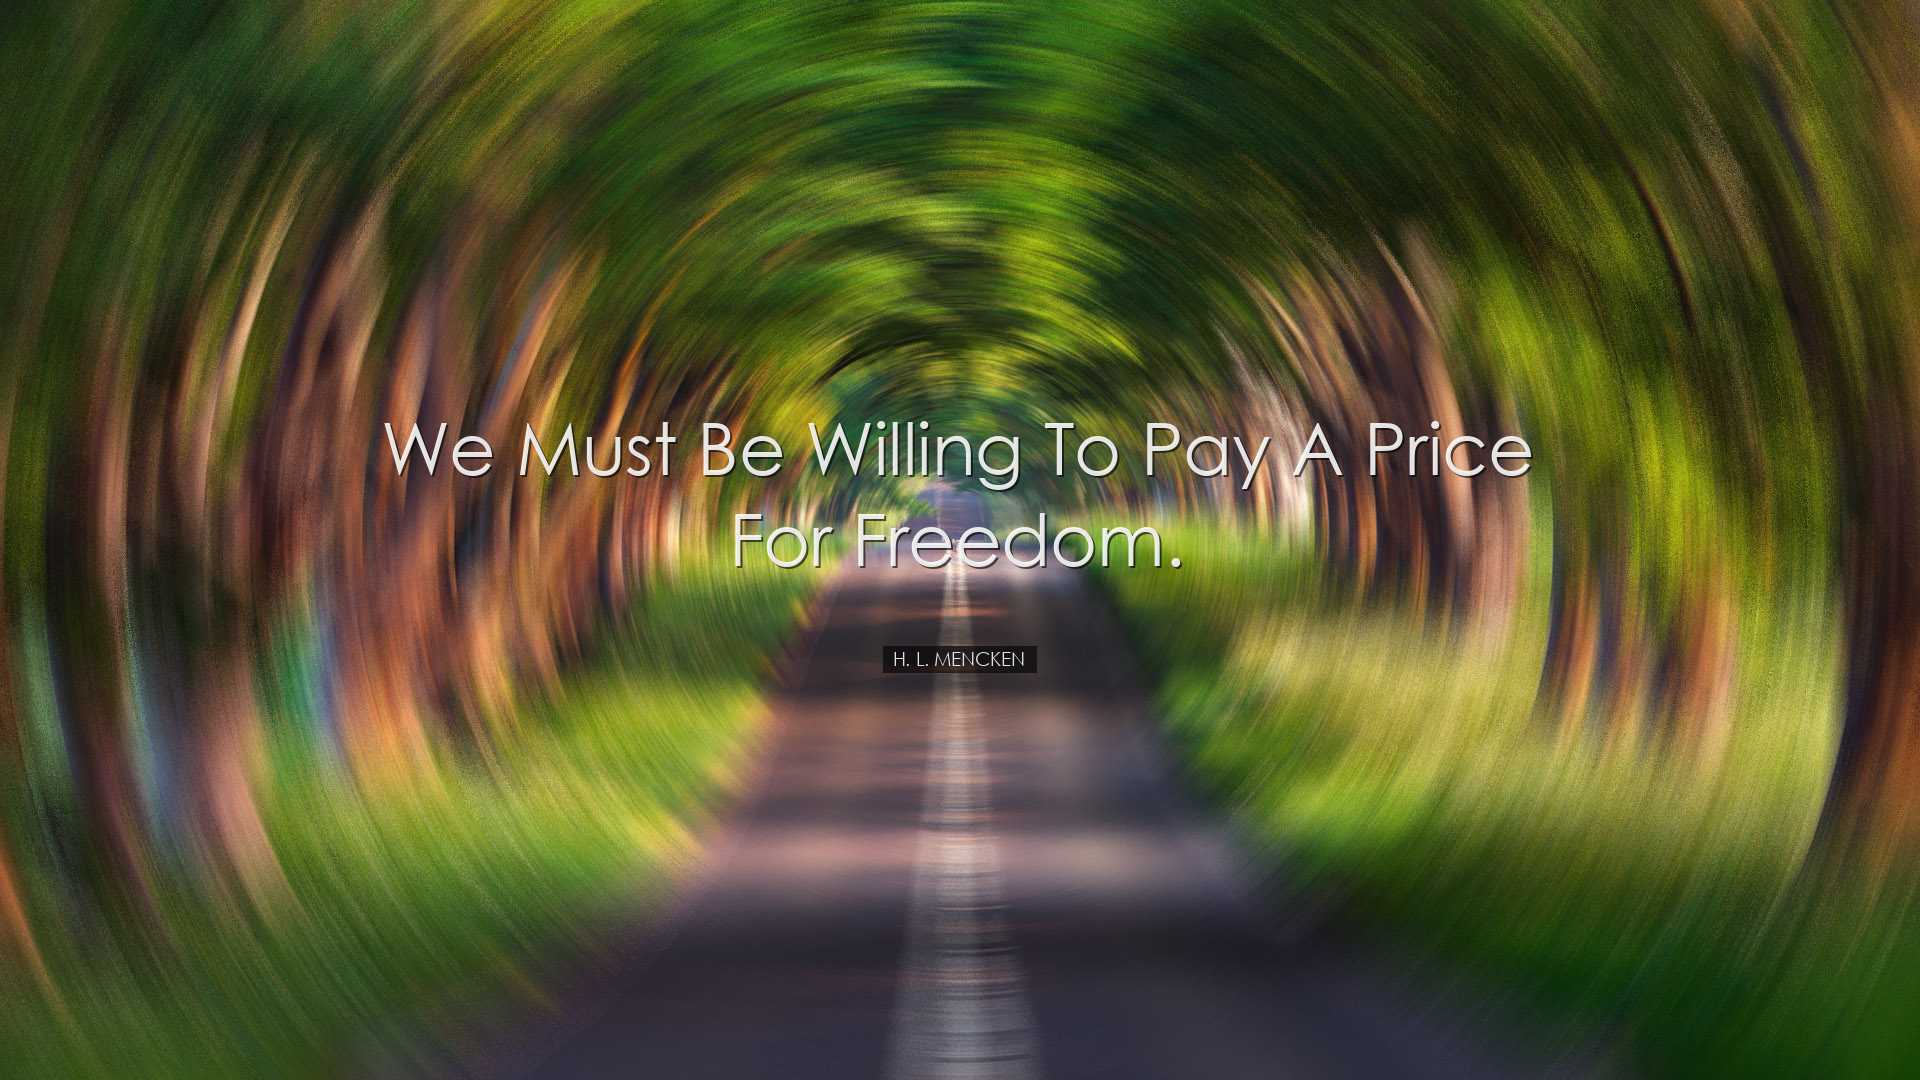 We must be willing to pay a price for freedom. - H. L. Mencken